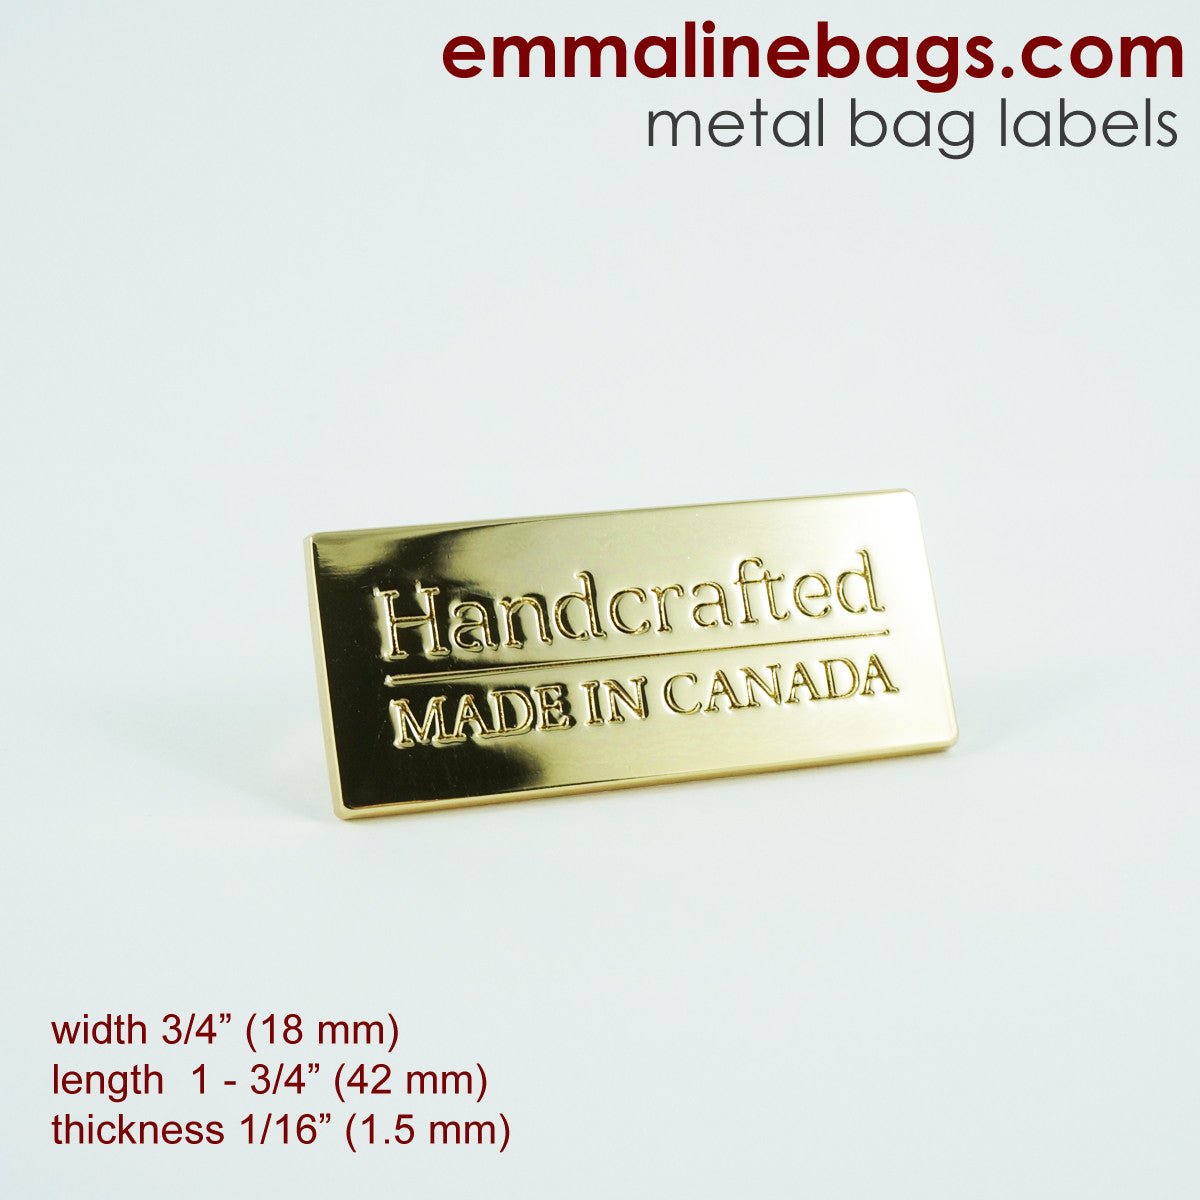 Metal Bag Label: Handcrafted - Made in Canada - Emmaline Bags Inc.